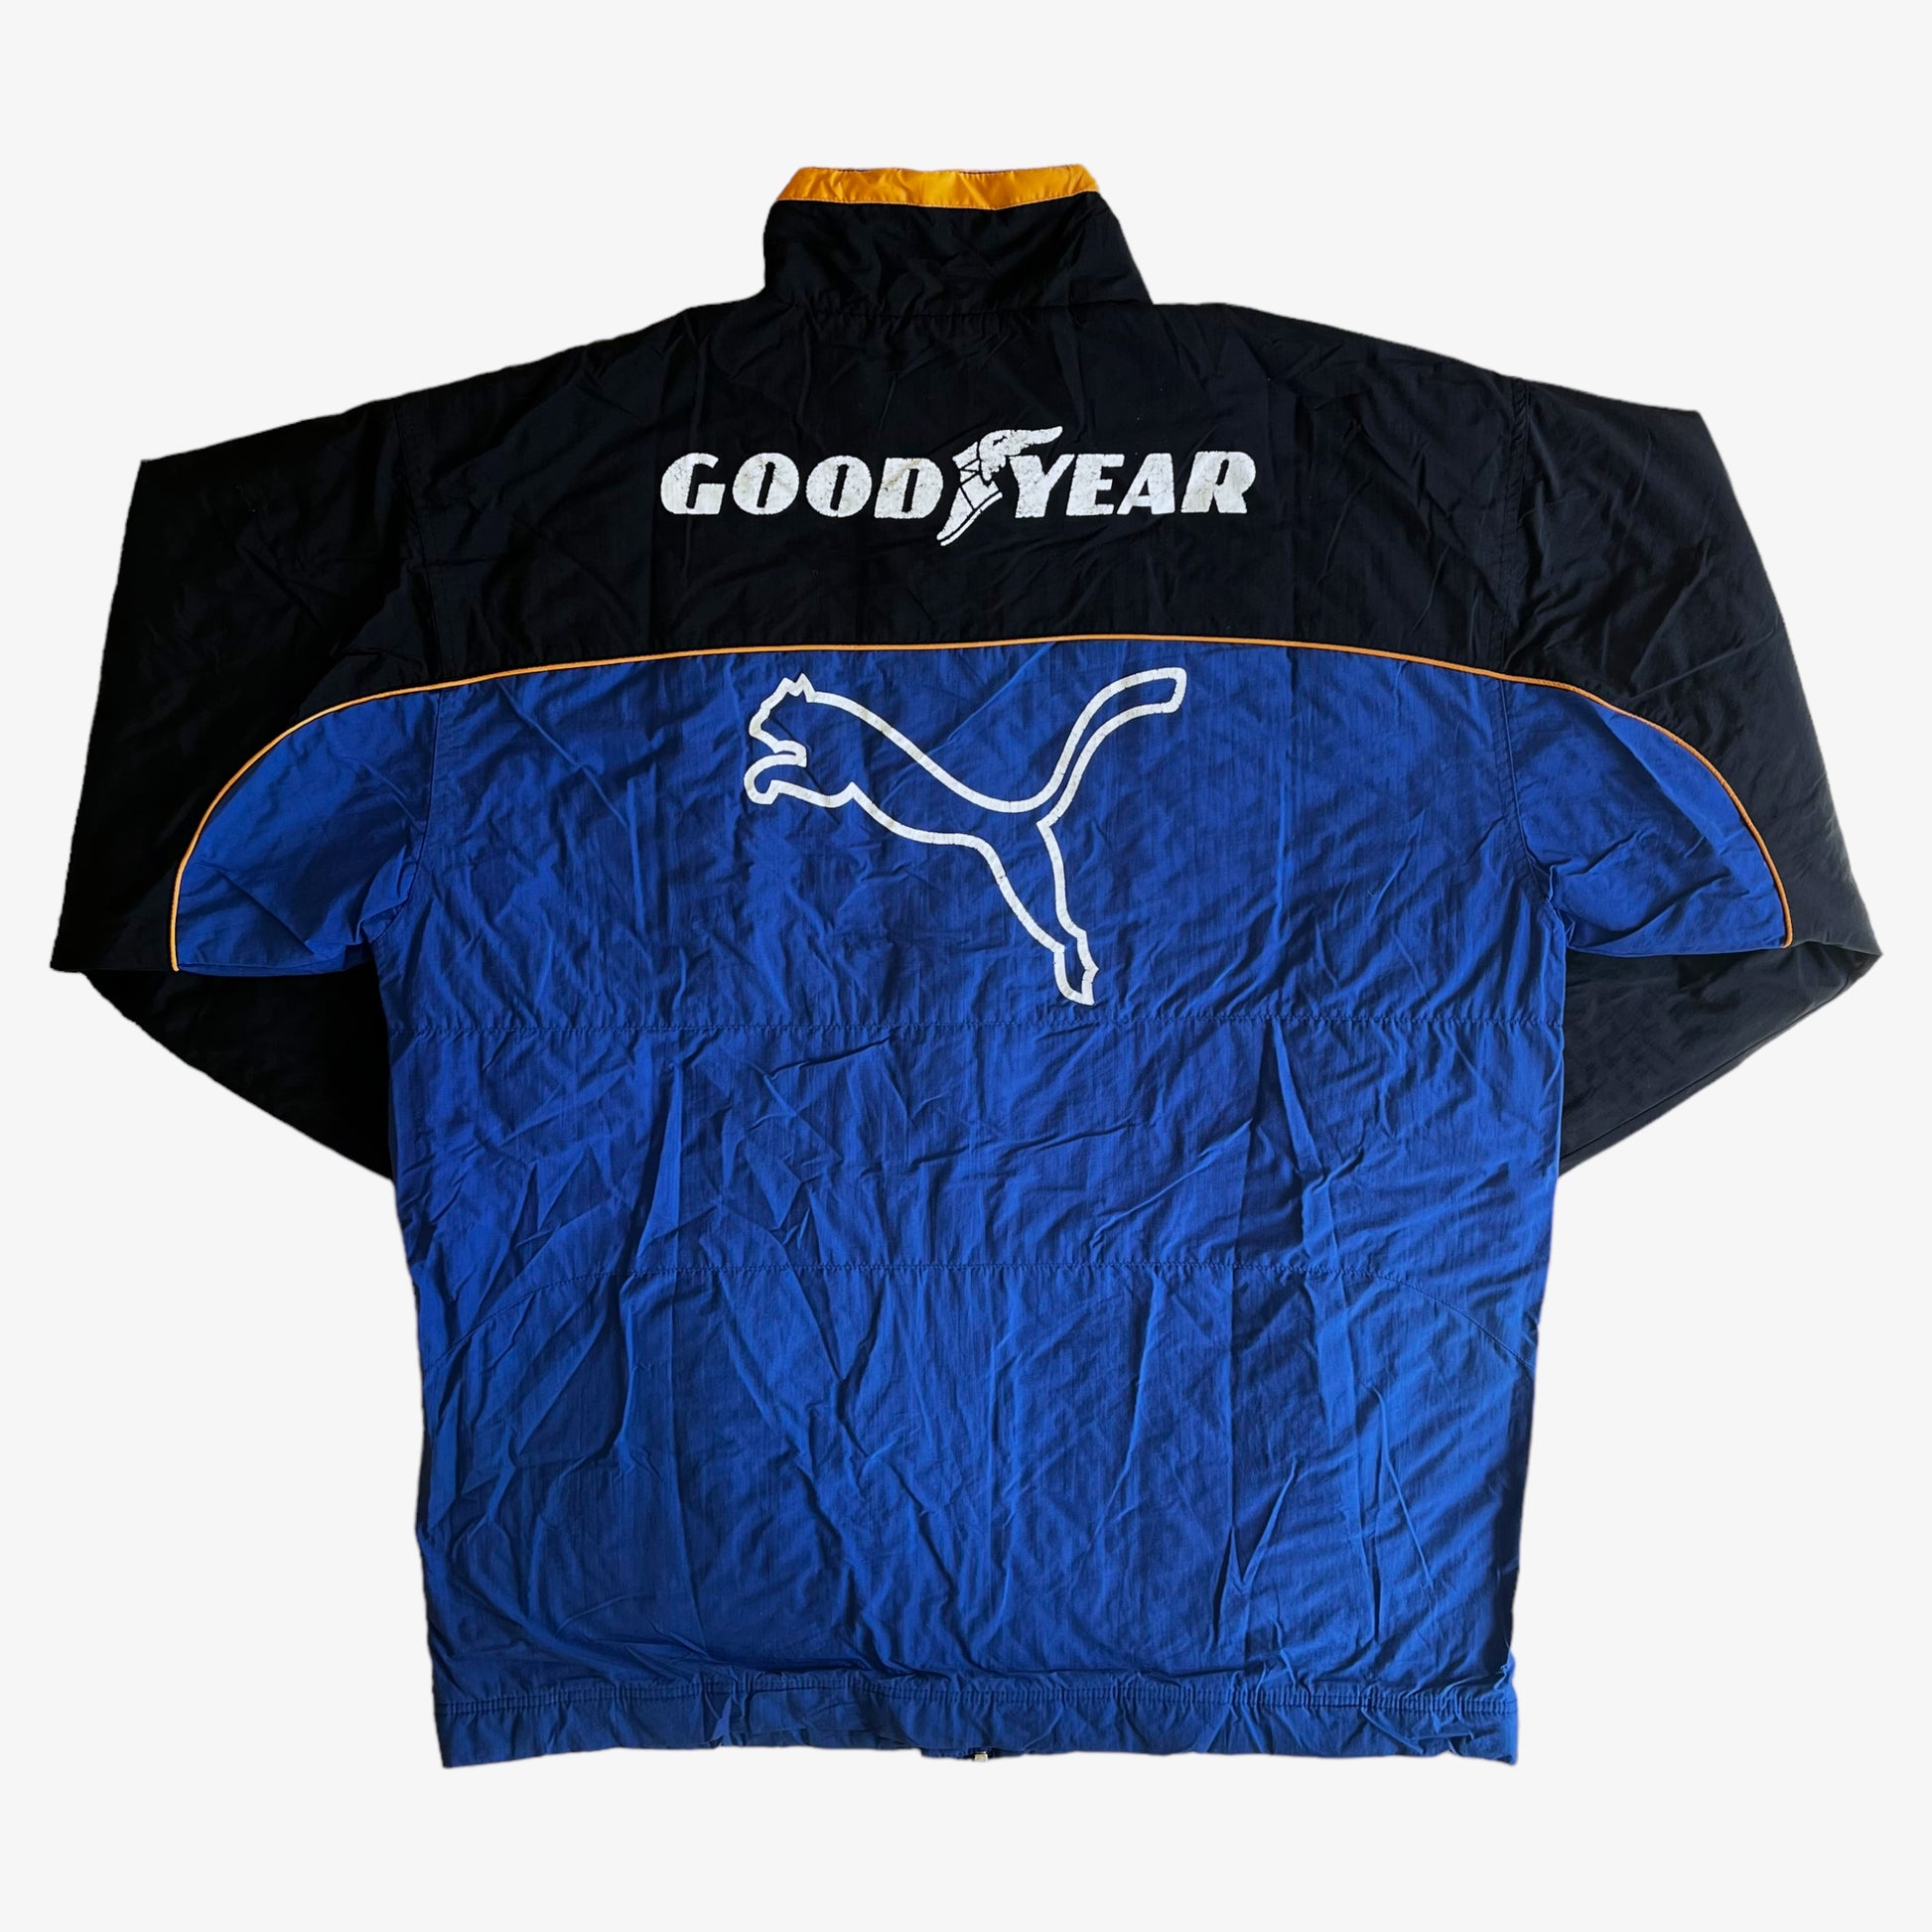 Vintage 90s Puma Wolverhampton Wanderers 1996 Blue Drill Coat With Big Spell Out Goodyear Back Logo Back - Casspios Dream